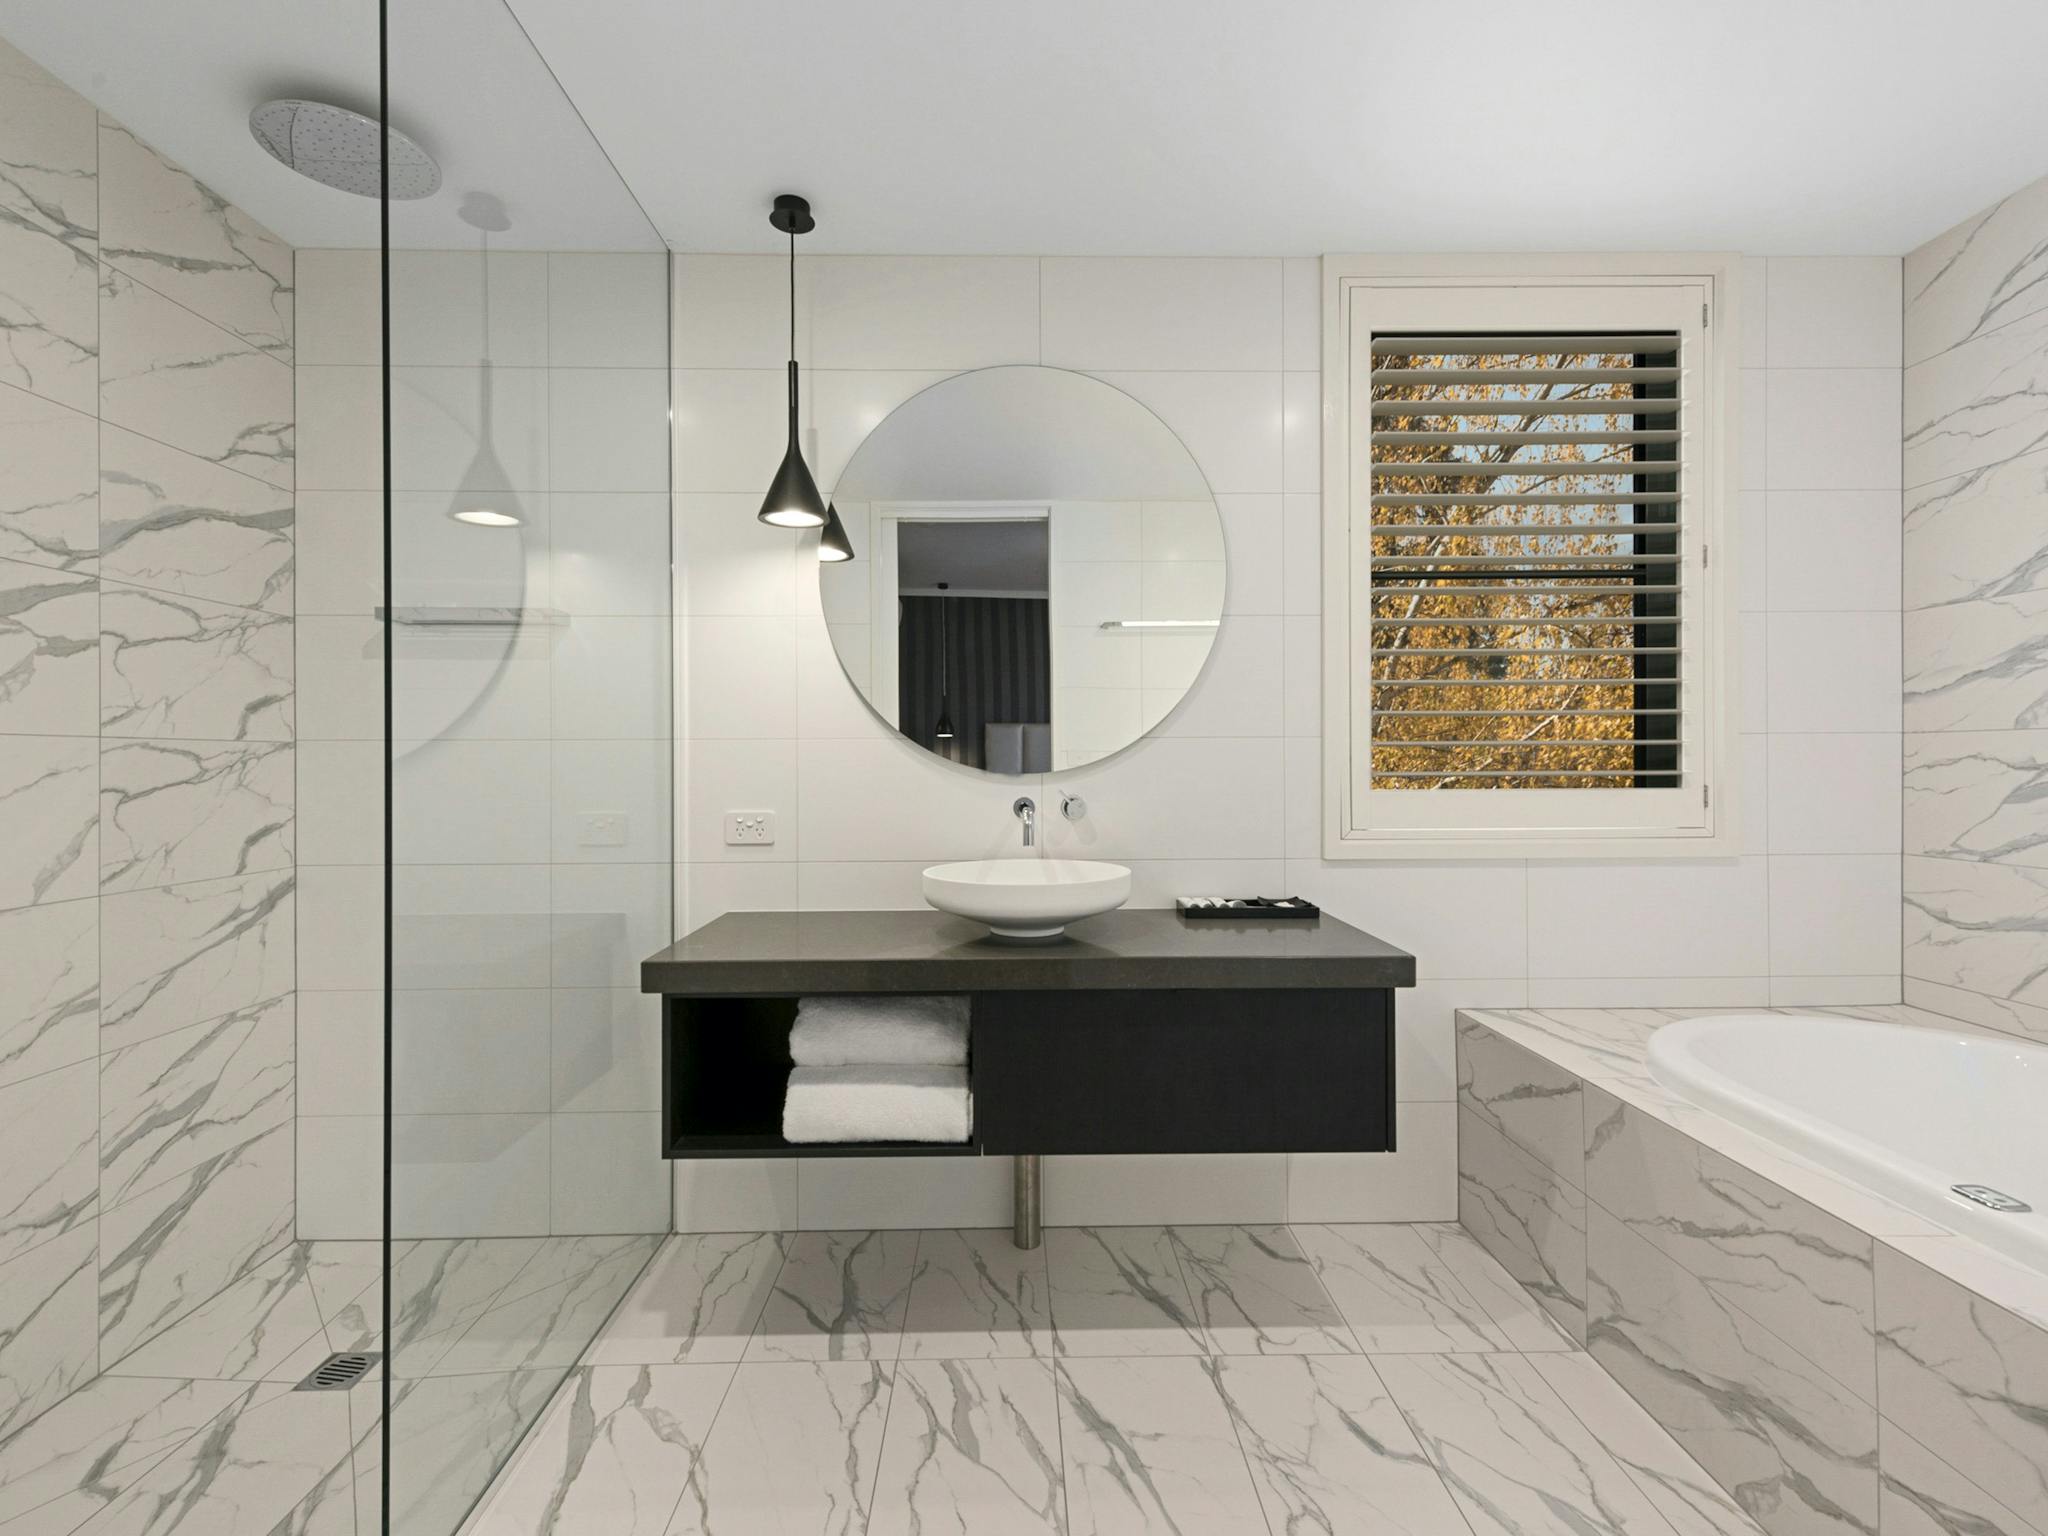 Modern, renovated bathroom with large walk in shower, spa bath and window